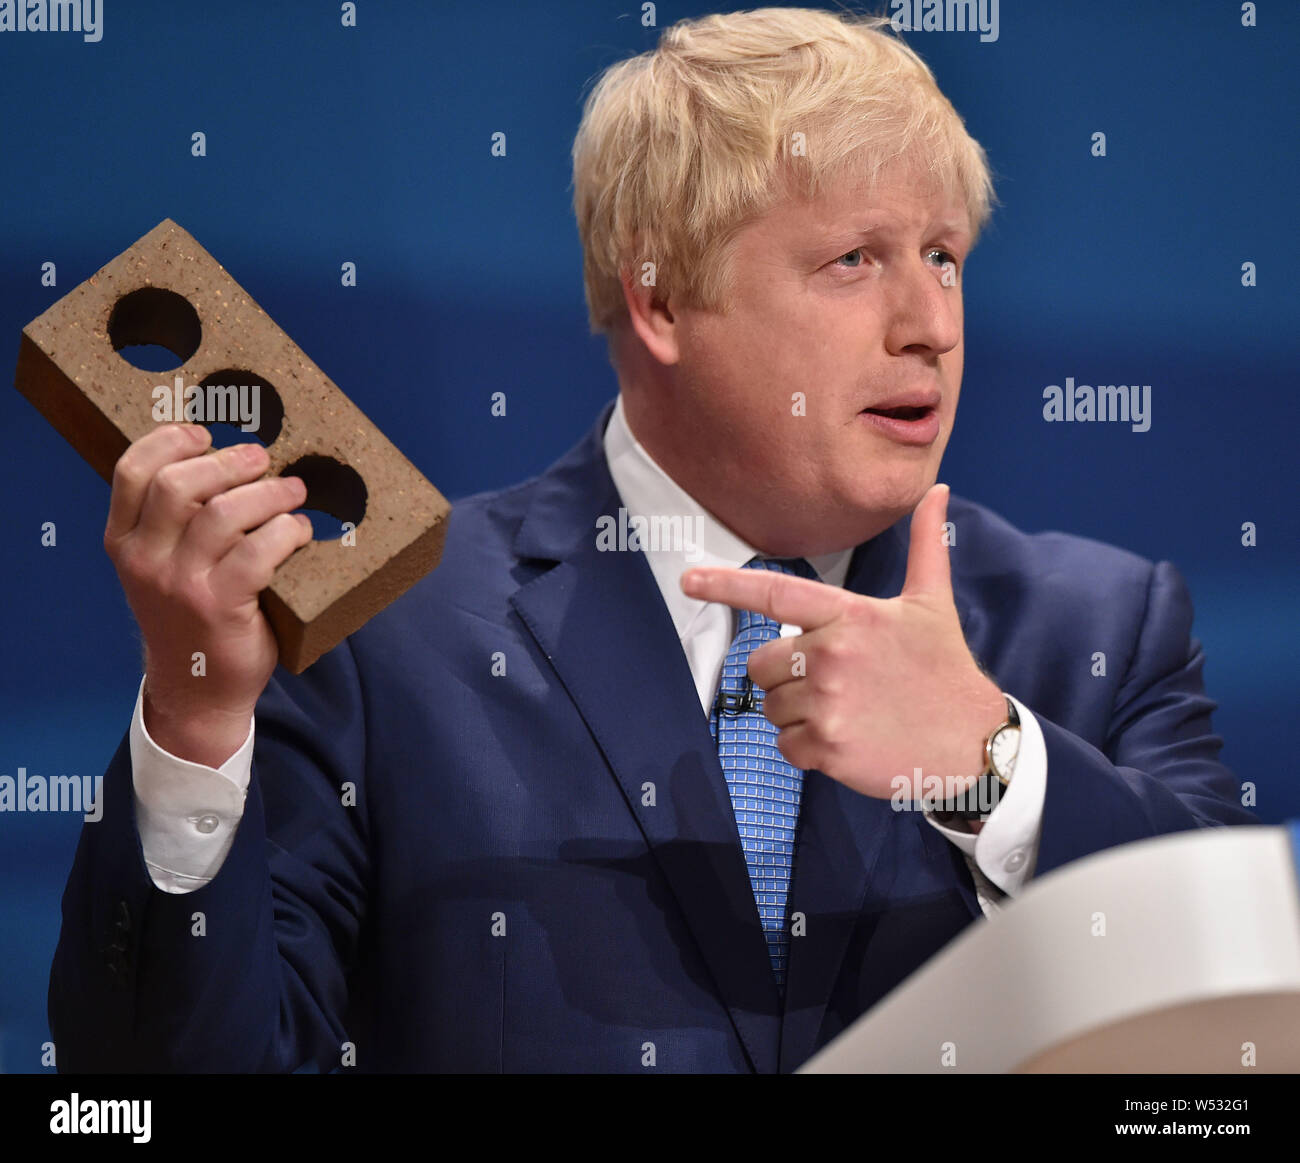 Boris Johnson speaking at the 2014 Conservative Party Conference in Birmingham, England on September 30th 2014. Stock Photo